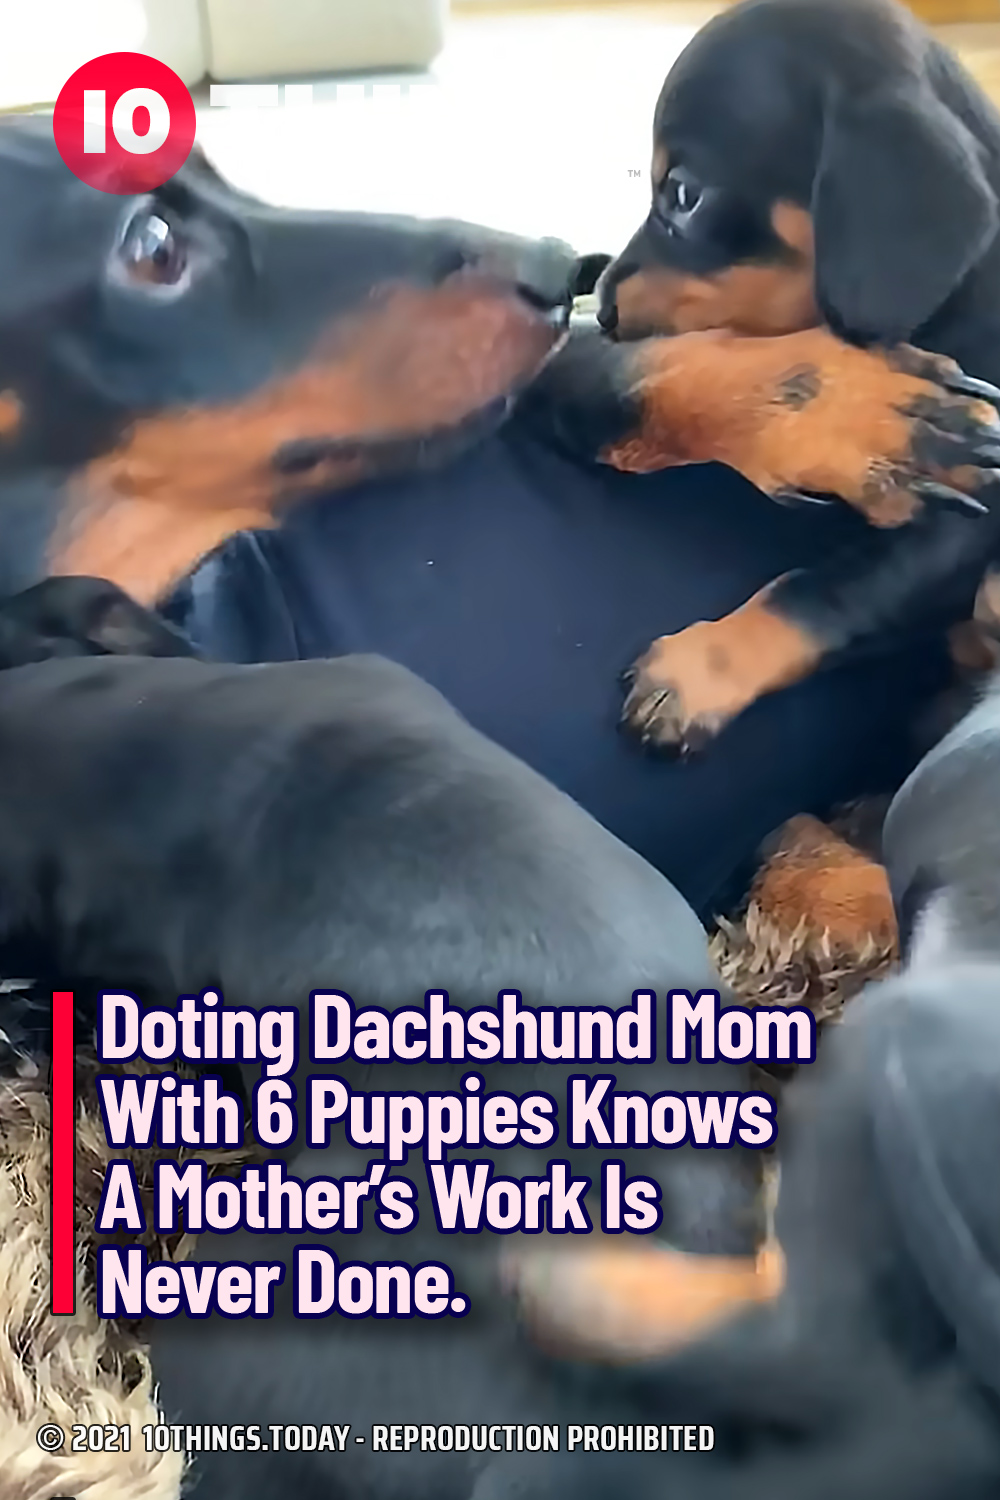 Doting Dachshund Mom With 6 Puppies Knows A Mother’s Work Is Never Done.